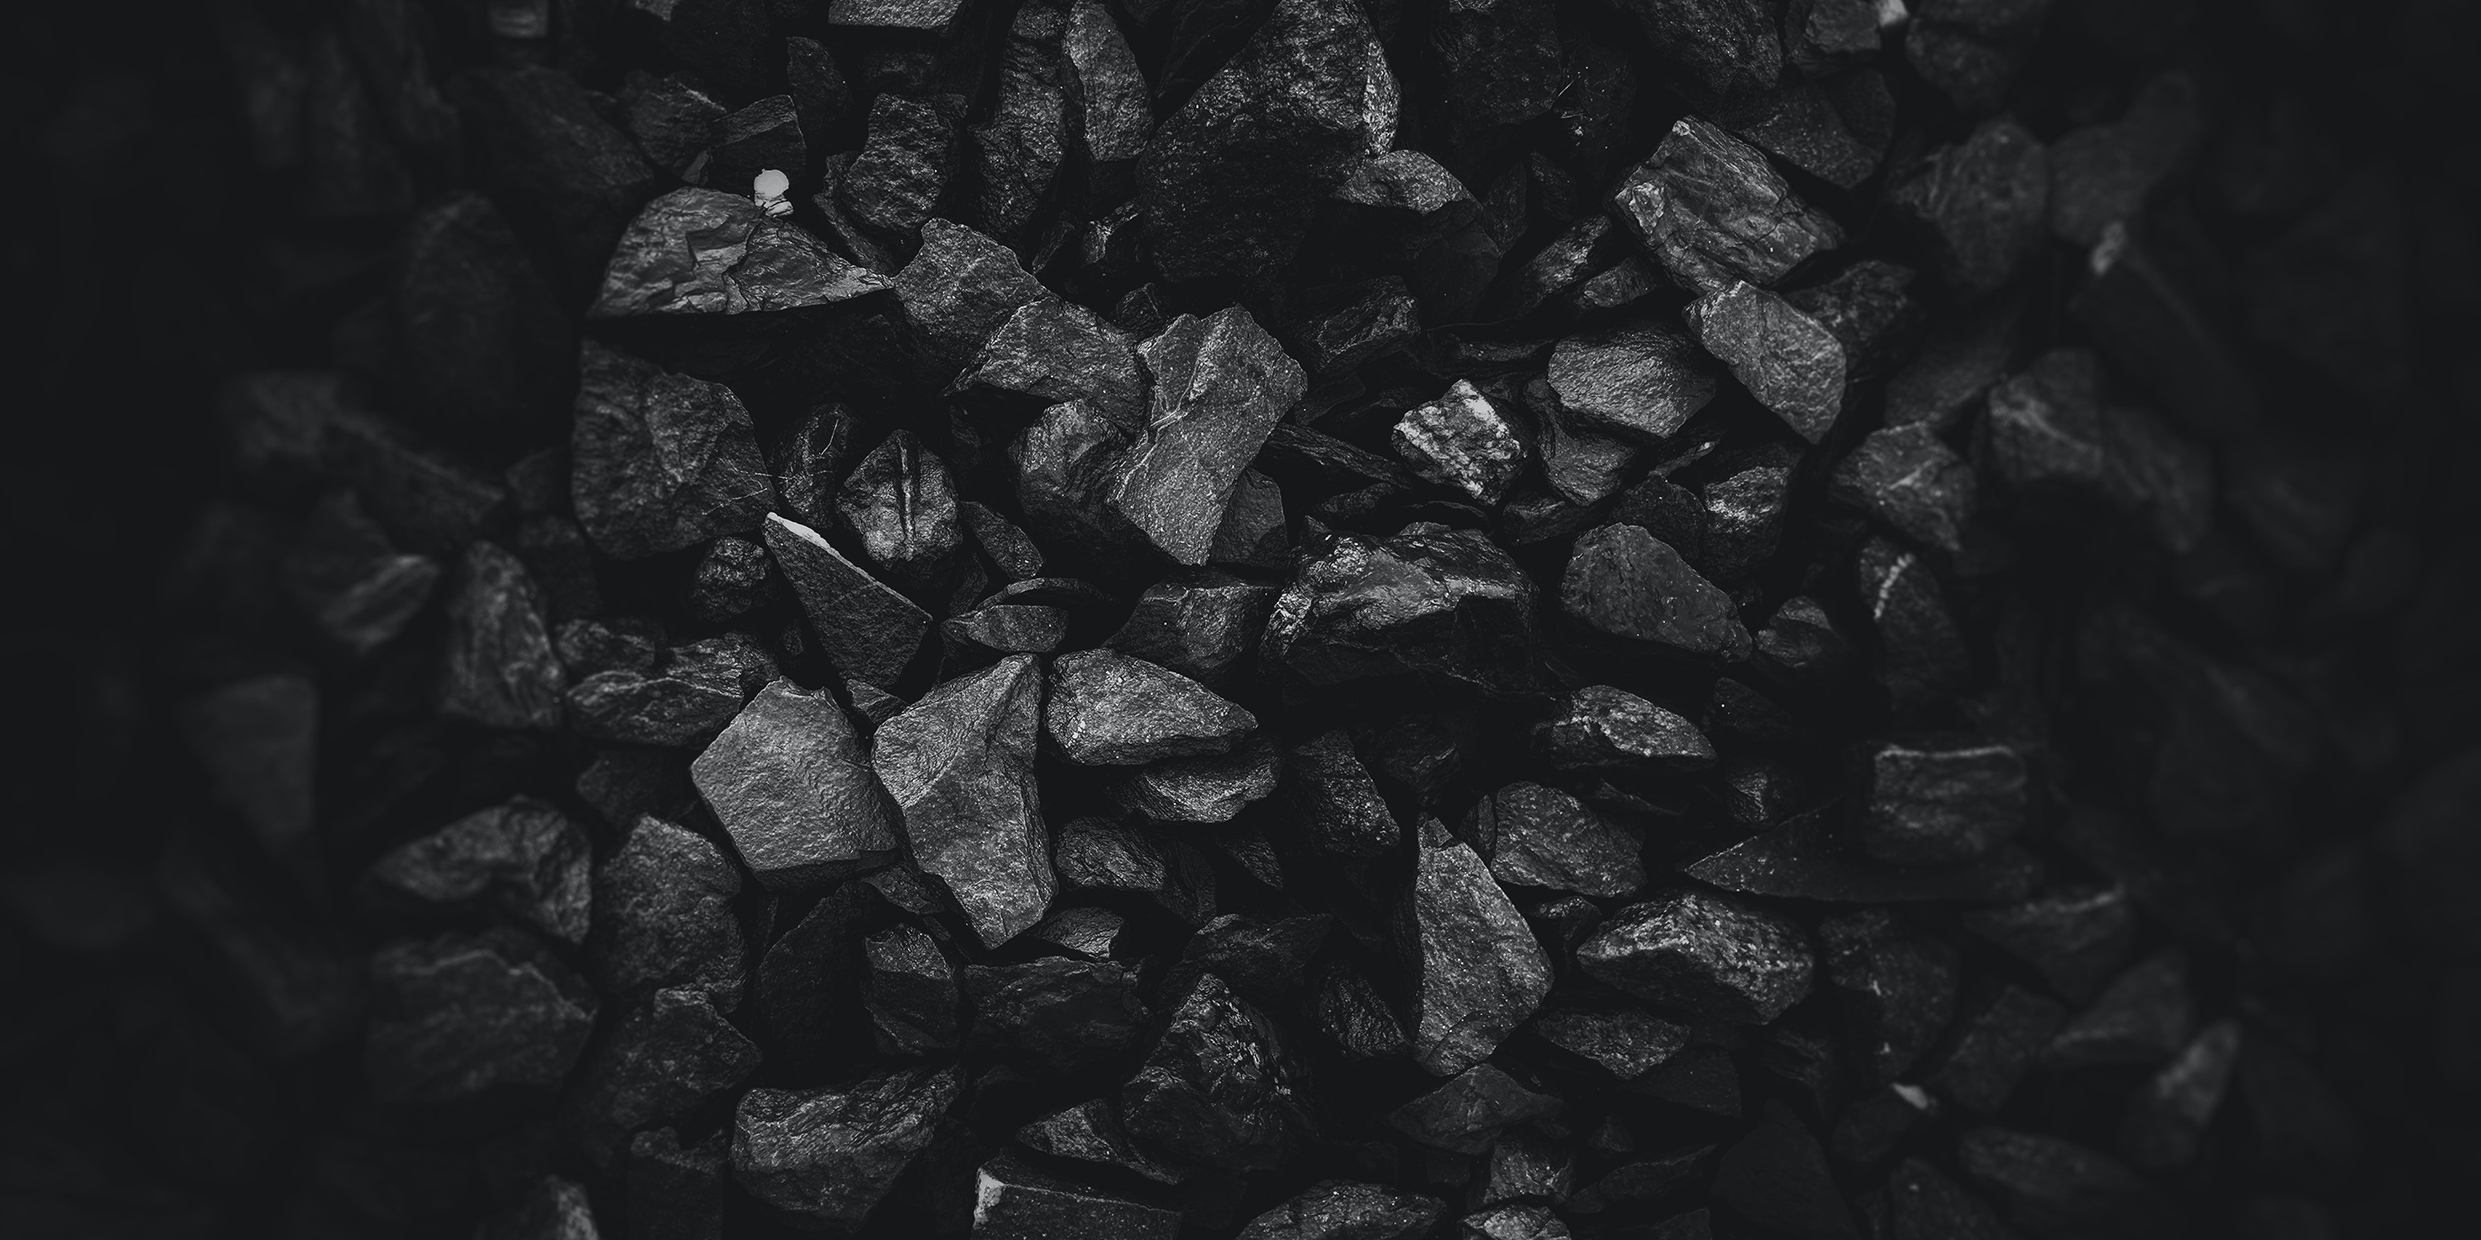 Image of a pile of coal